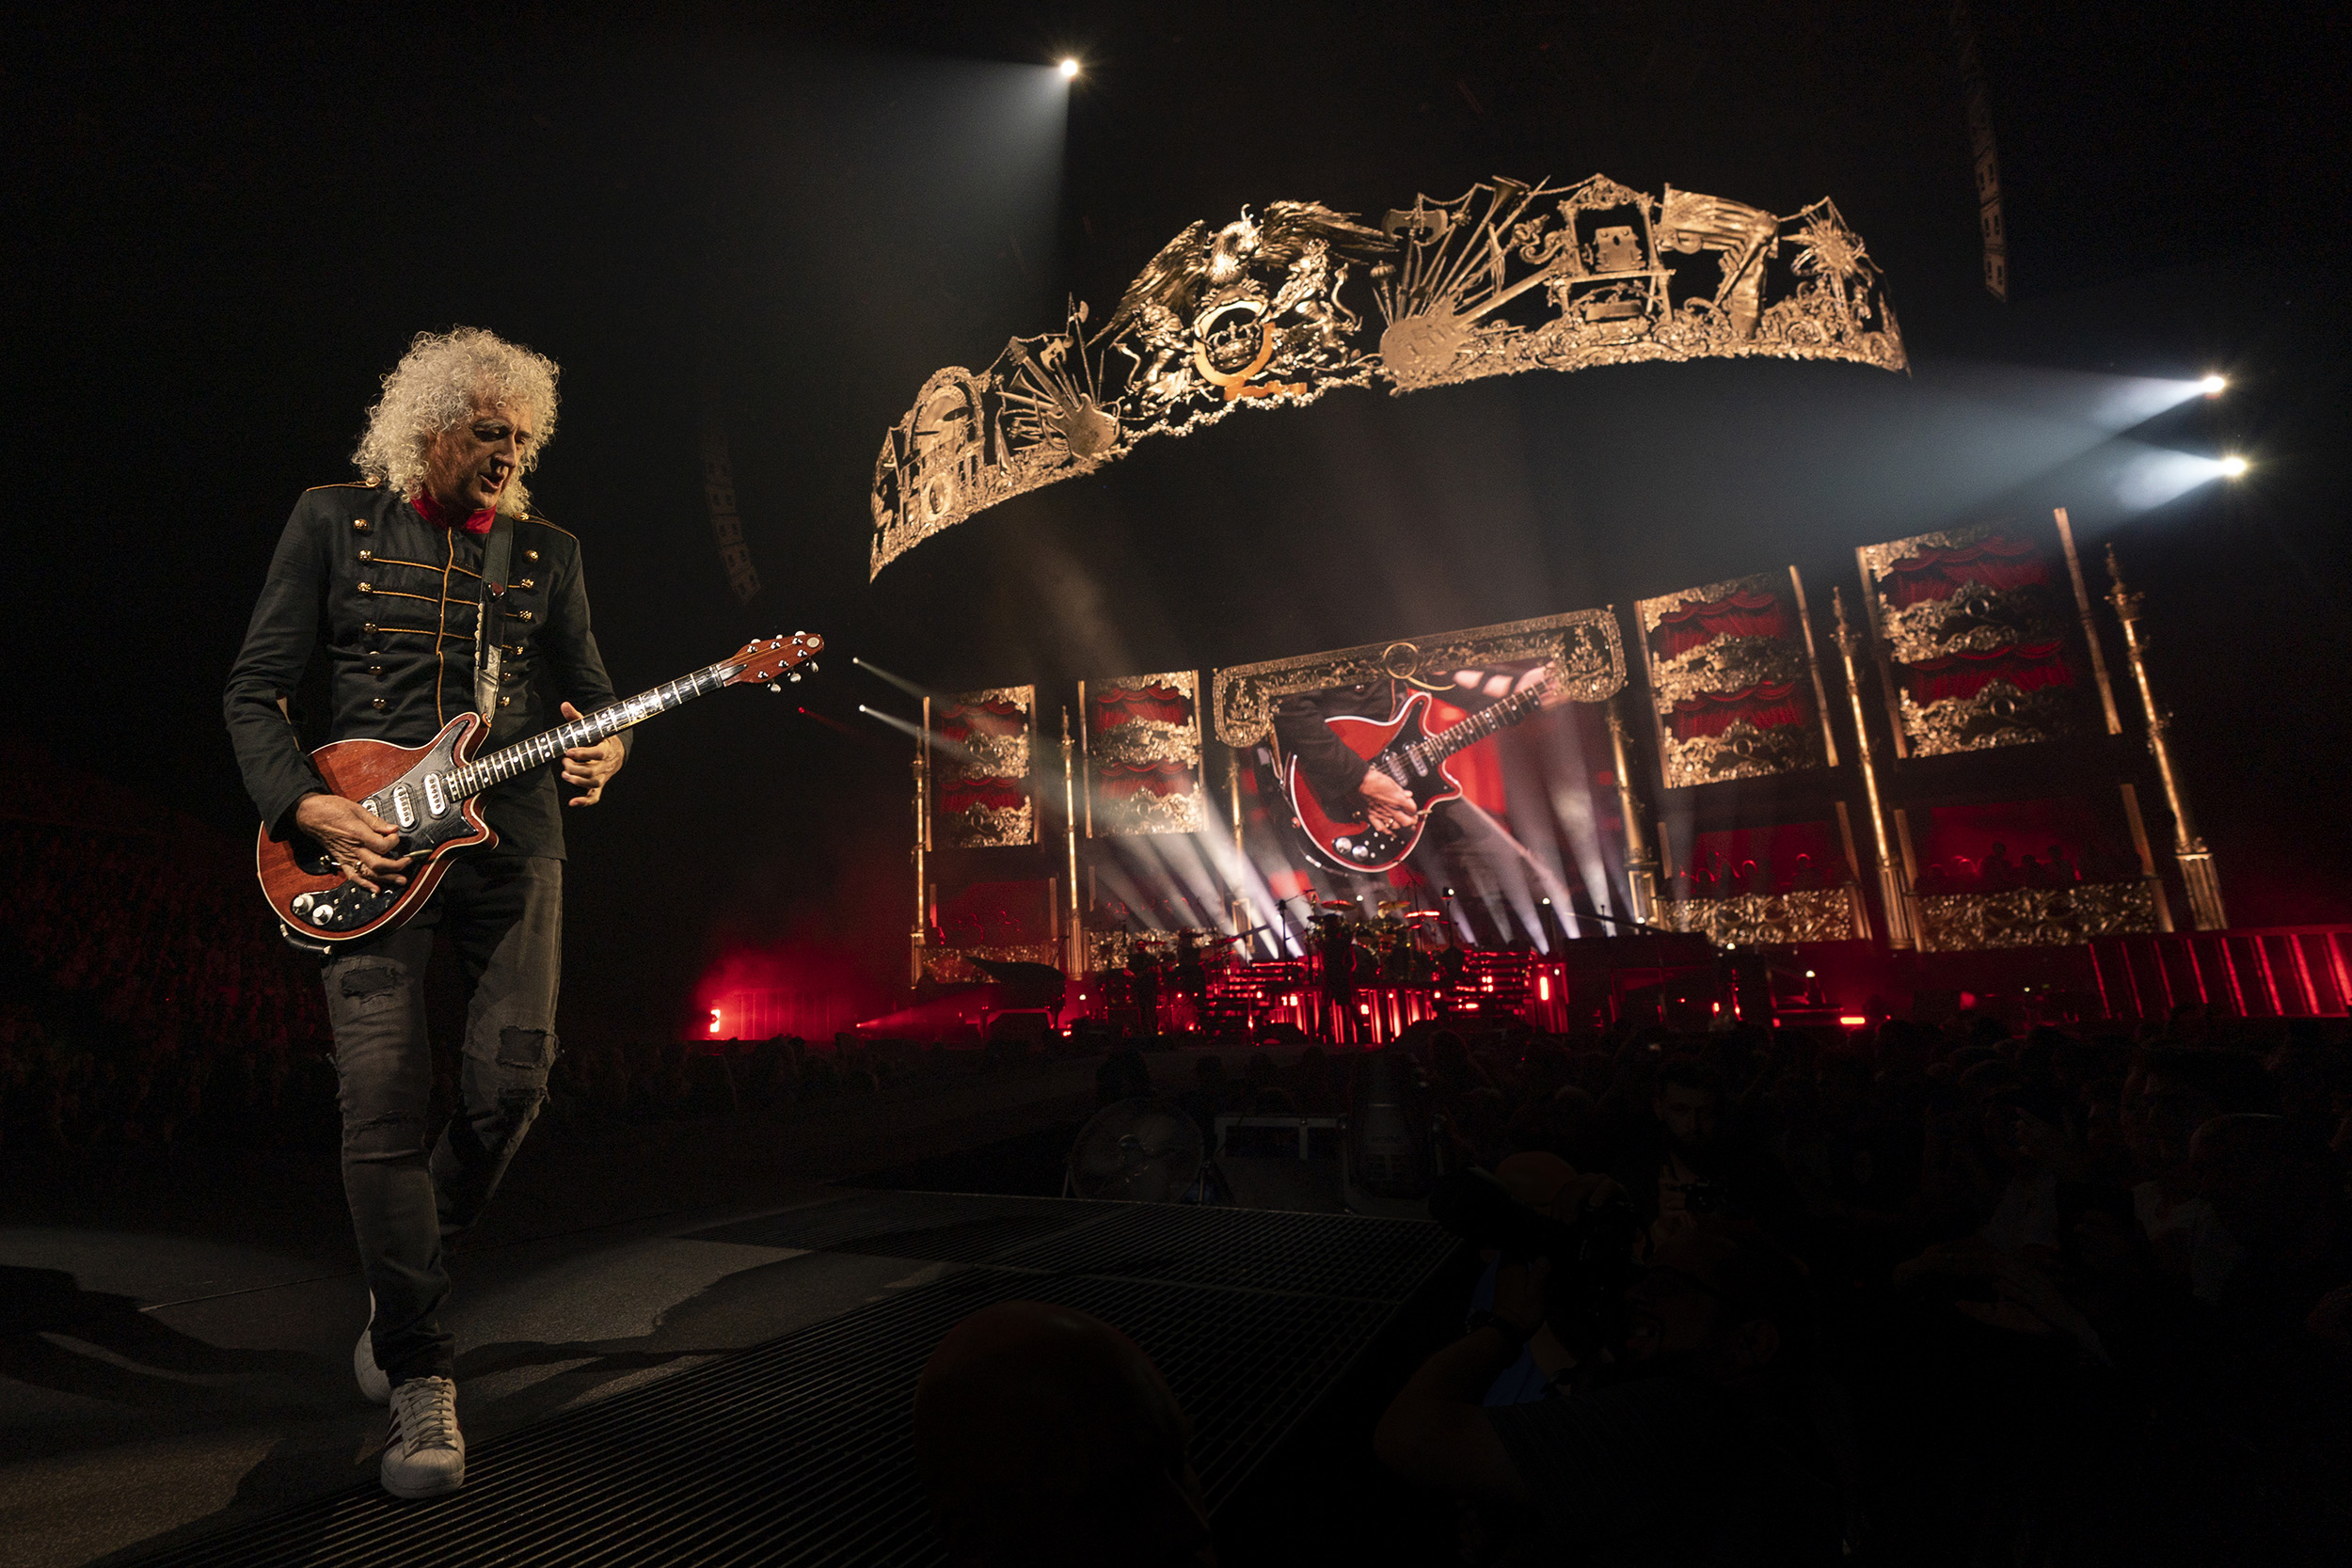 brian-may-playing-a-guitar-solo-on-stage.jpeg